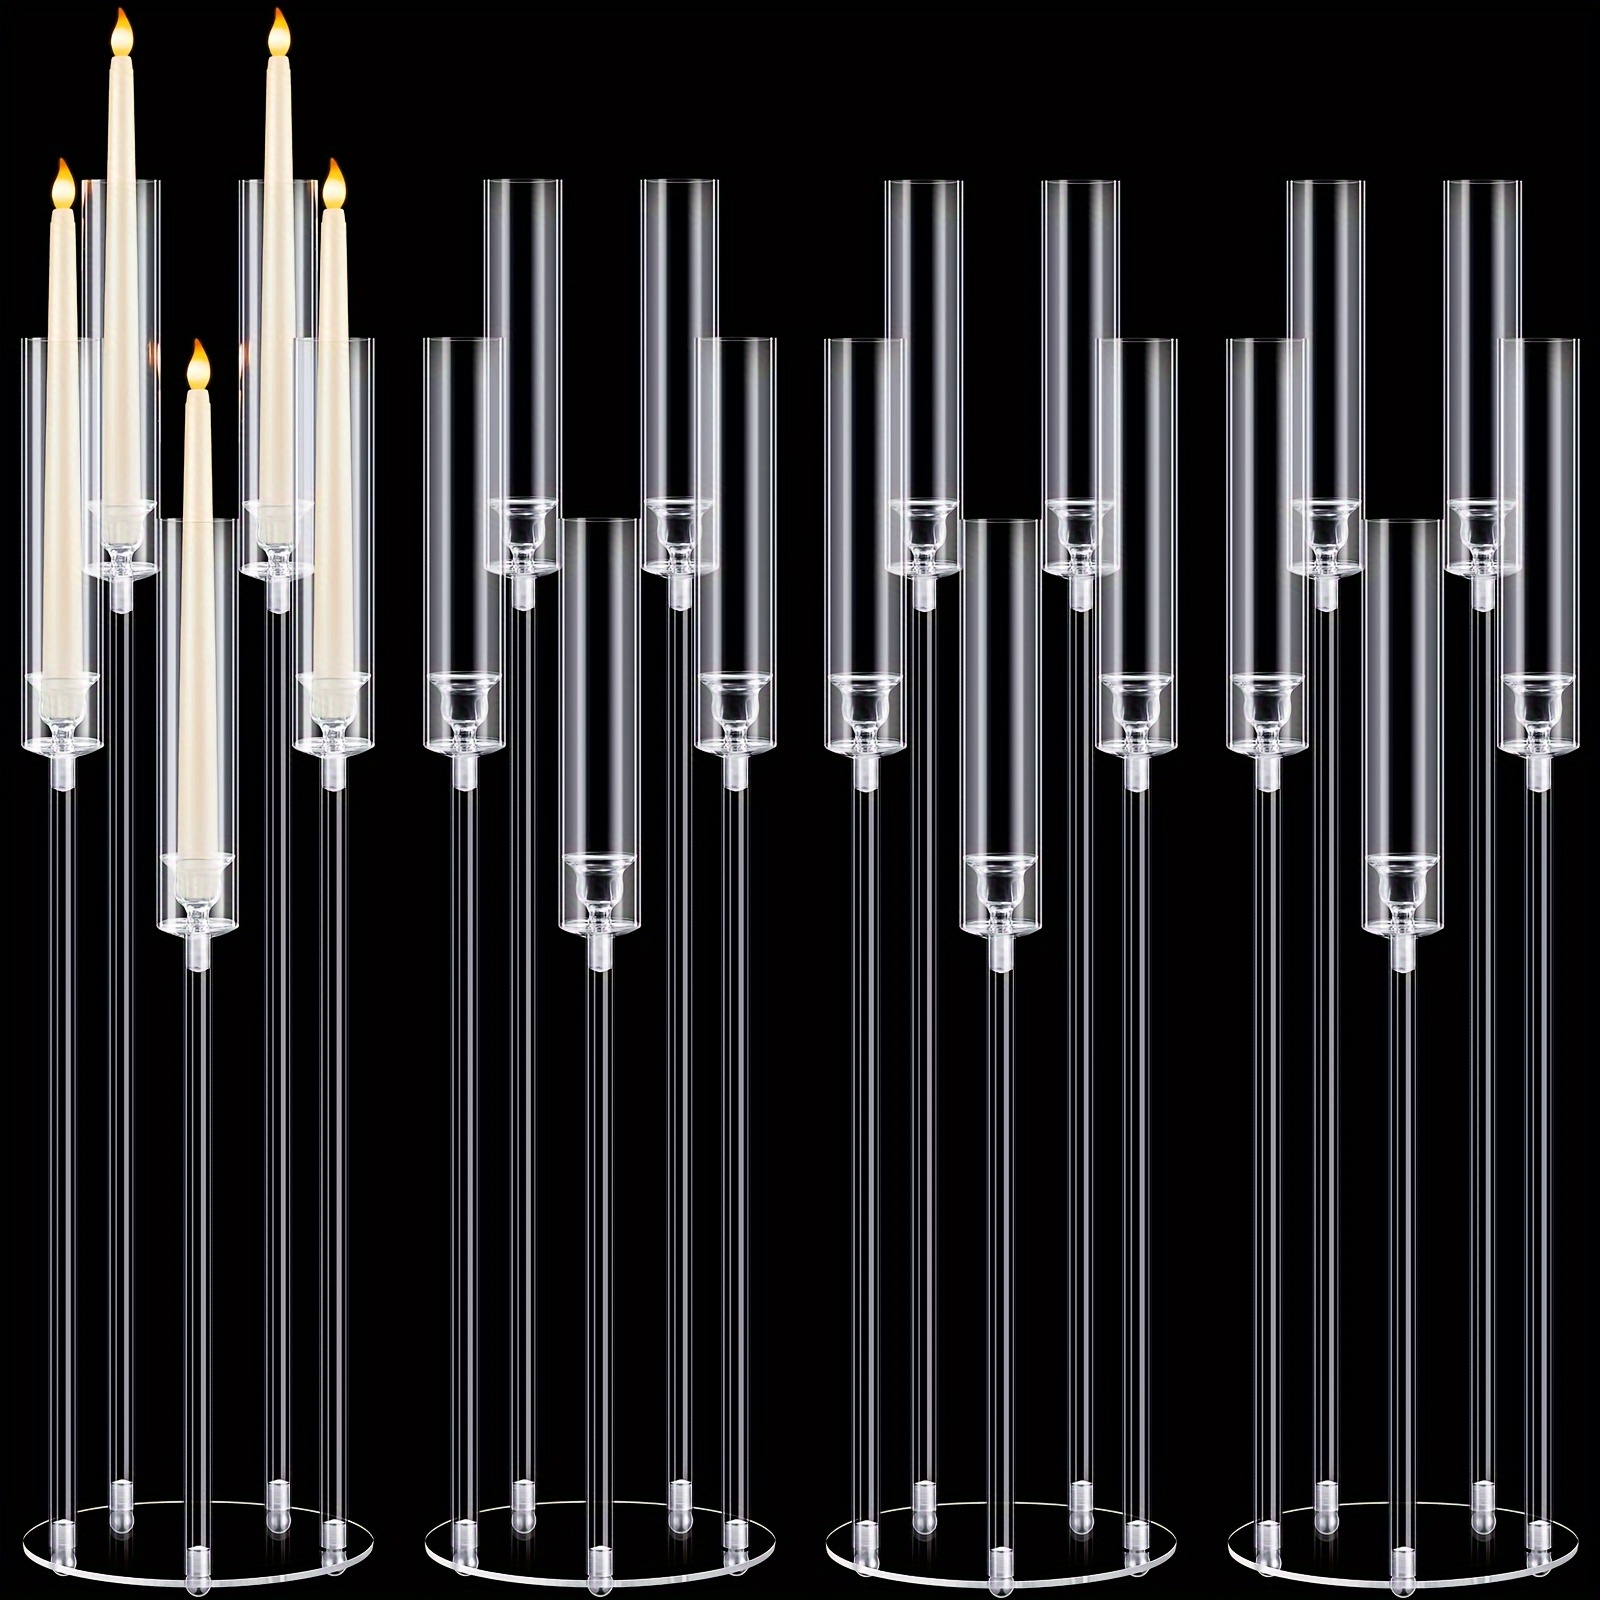 

4 Pcs Acrylic Candelabra Centerpieces Clear Candle Taper Candlestick Holder Crystal 5 Arm Candlesticks Holder With Acrylic Shade Pillar Fit 0.87" Led Candle For Wedding Dinner Party (clear)